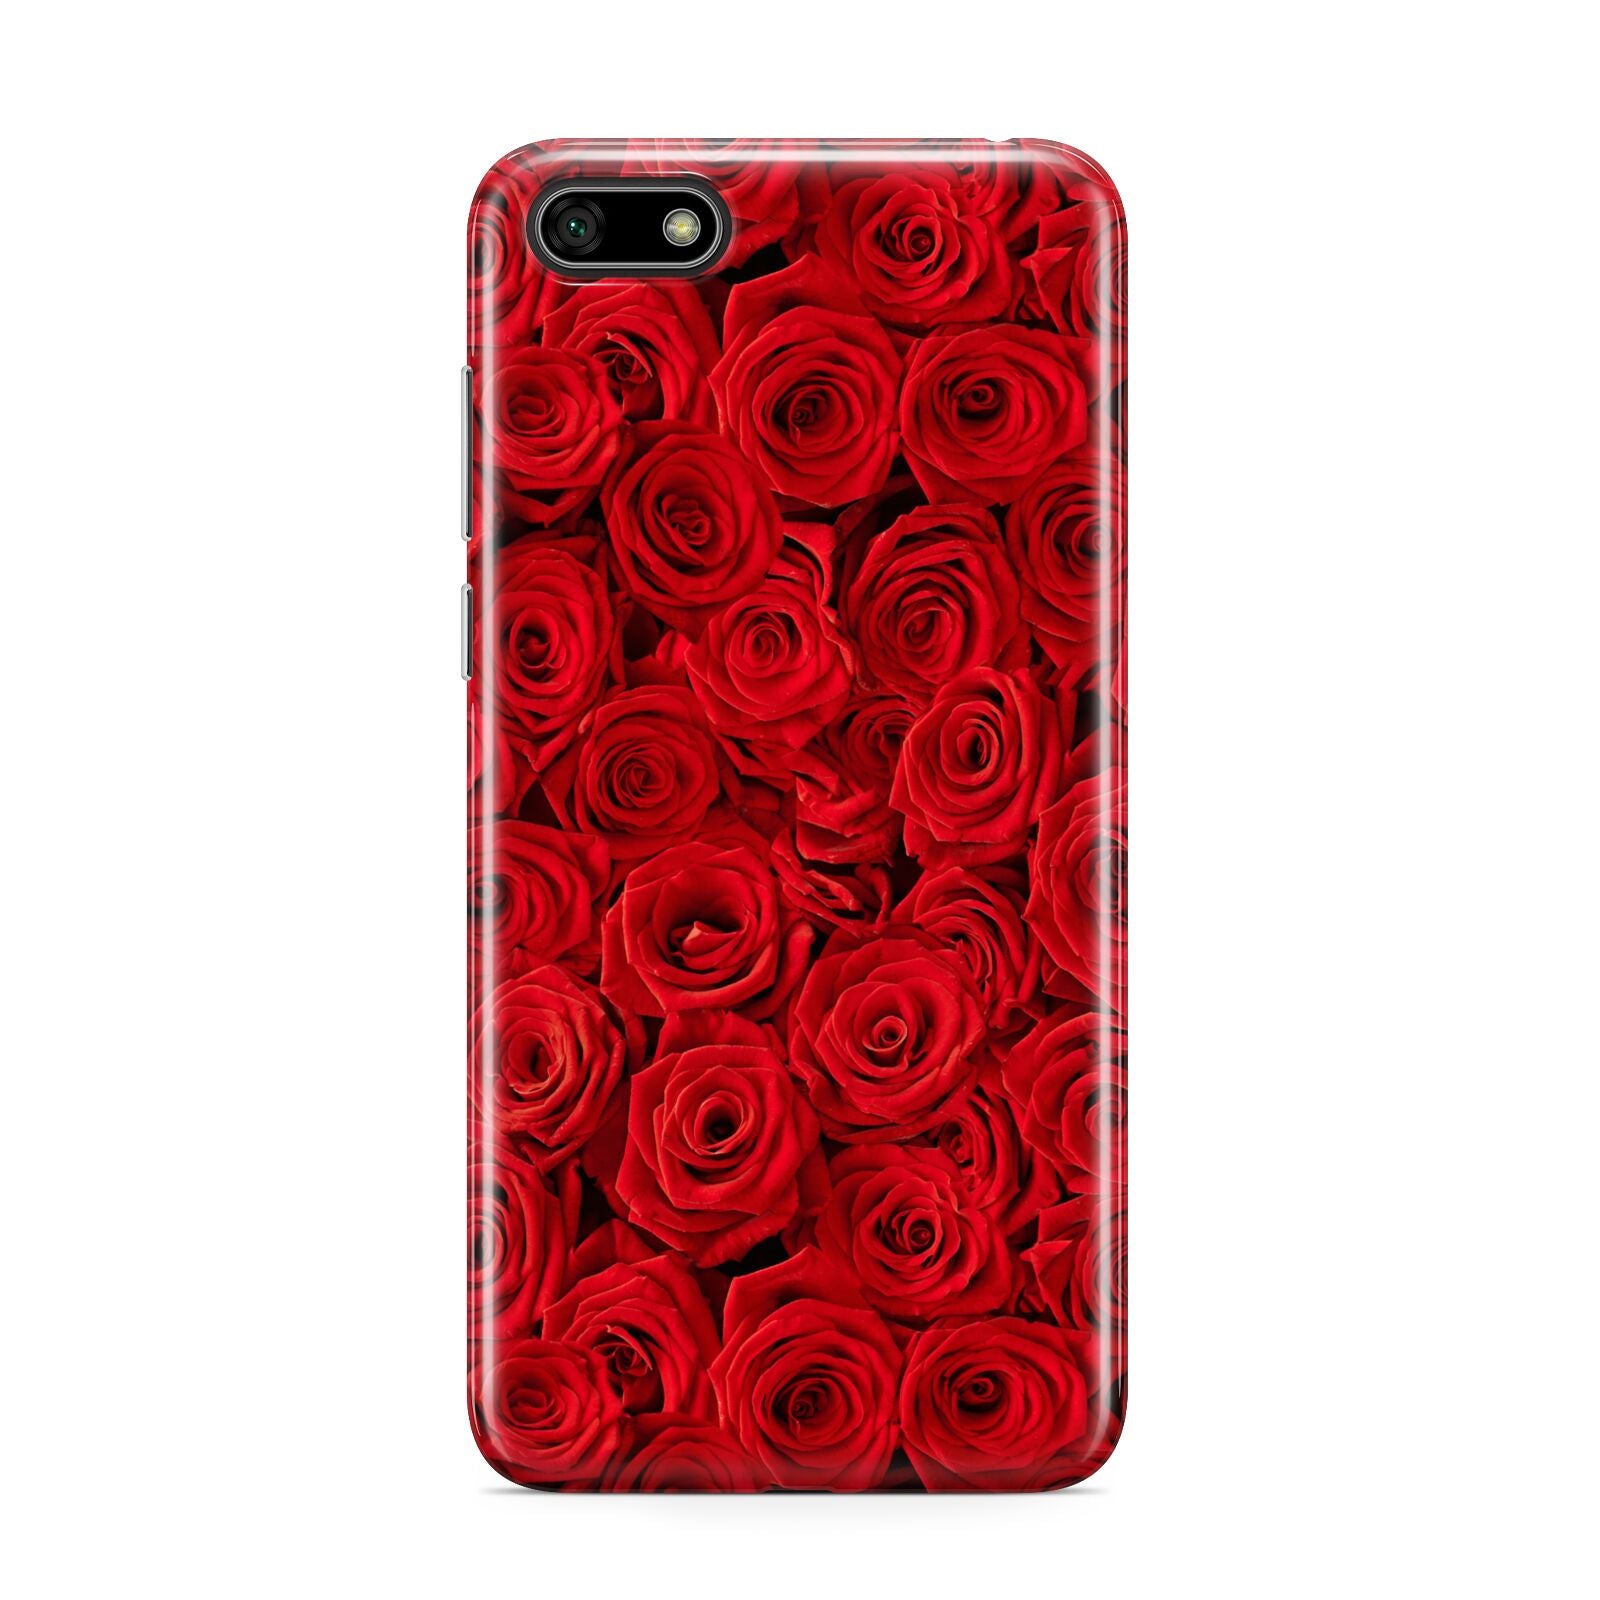 test THNG23 342 Huawei Y5 Prime 2018 Phone Case